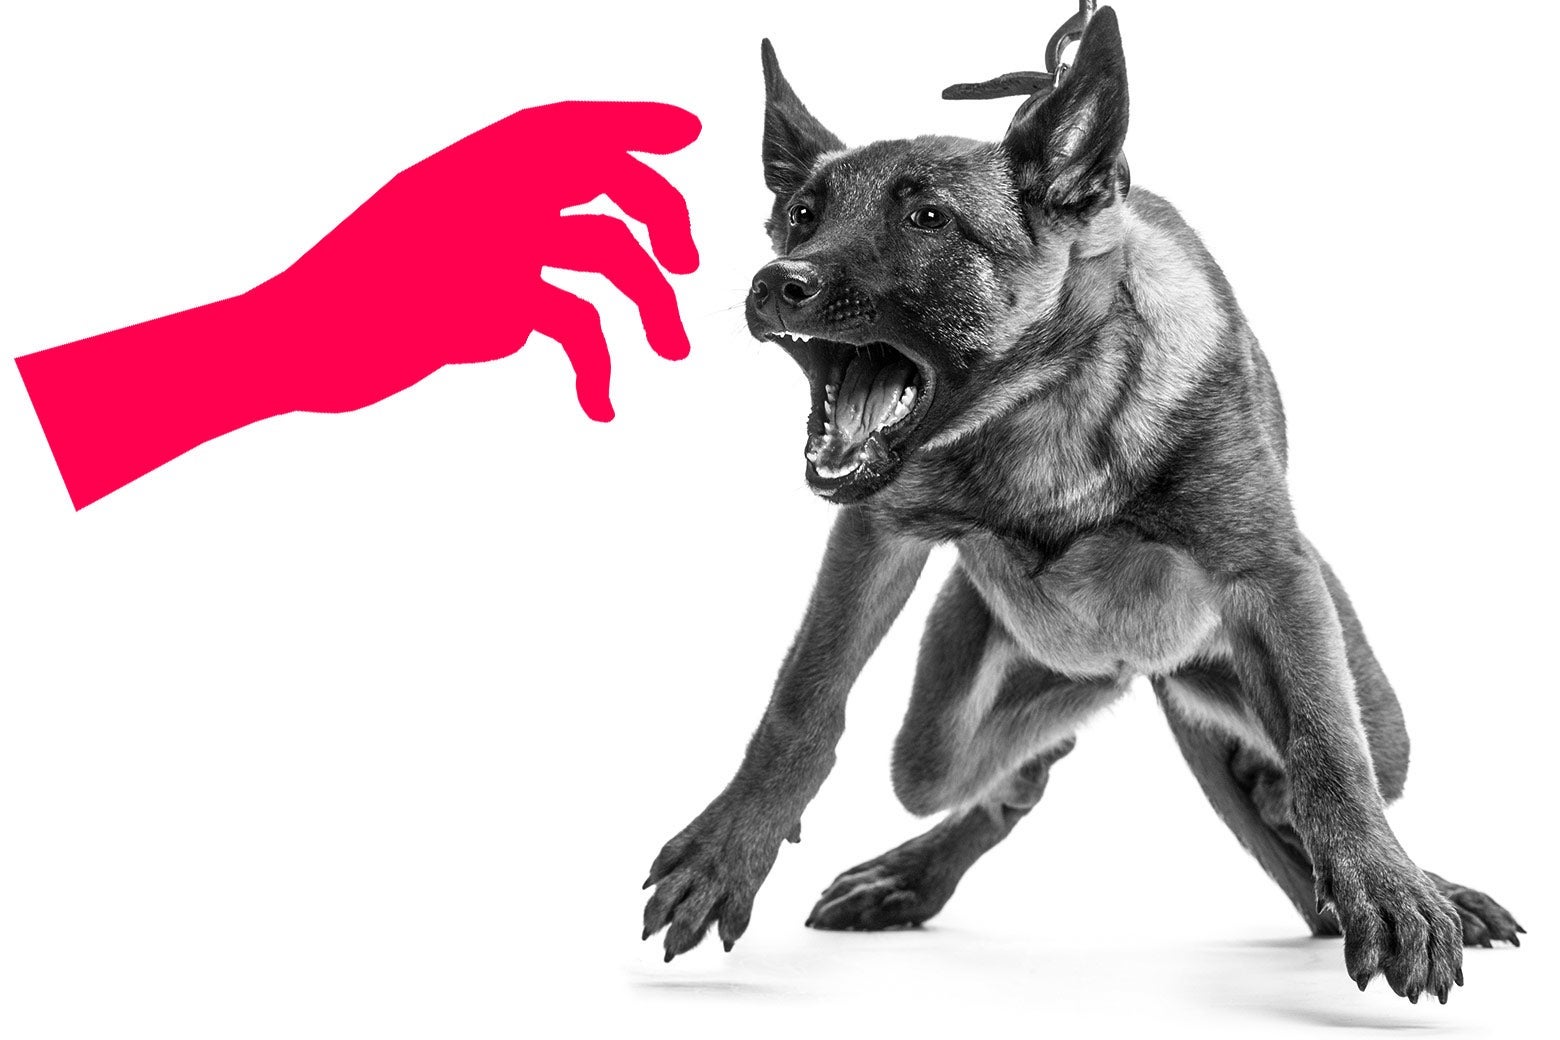 A graphic of a hand reaching out toward a dog that is barking and being held back.